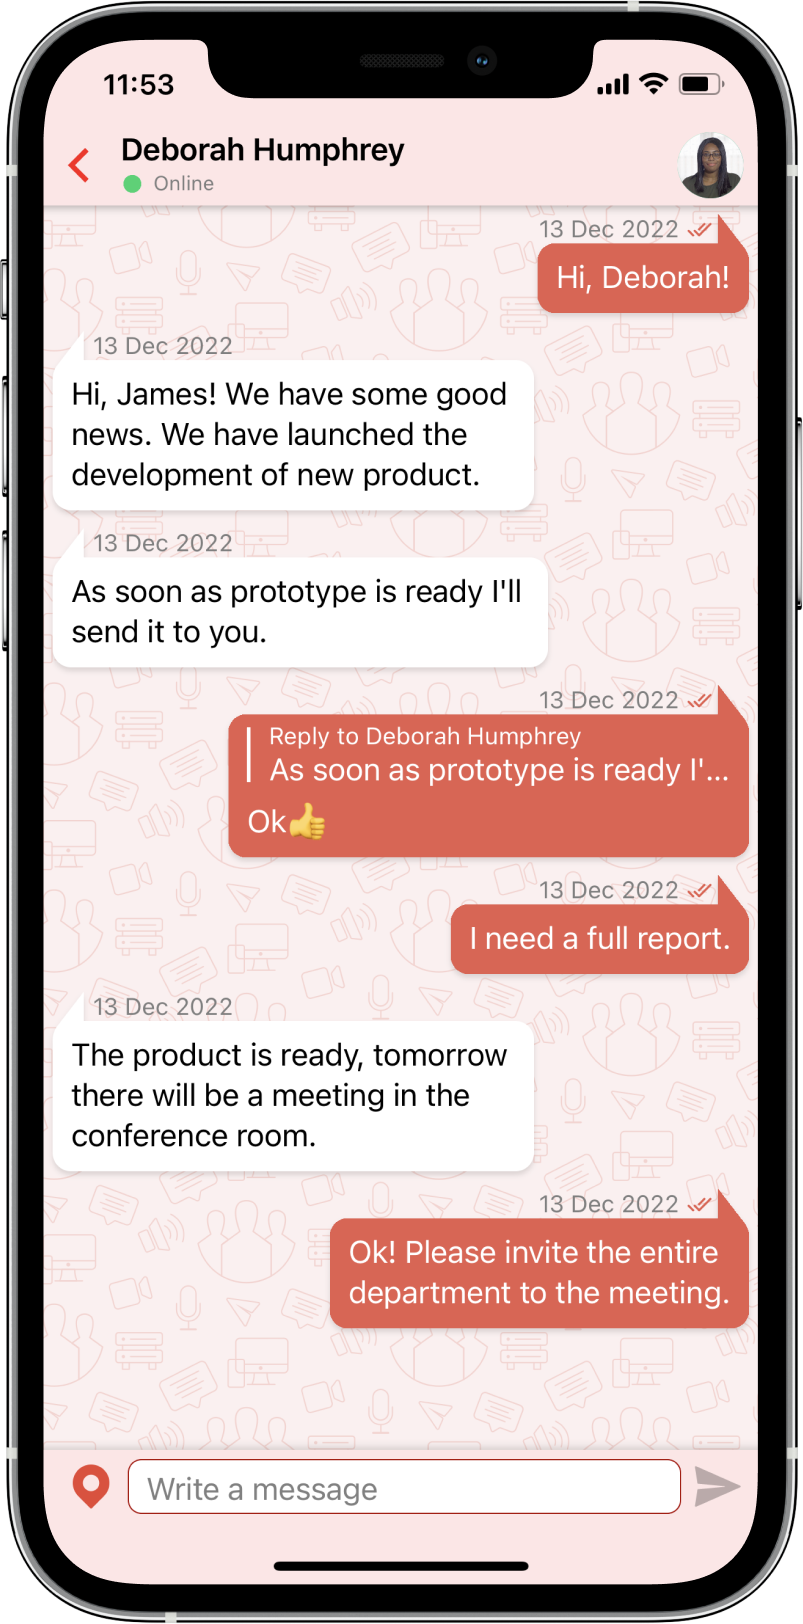 TrueConf 3.3 for iOS: new UI, Smart meeting mode, offline access to chats, contacts, and call history 12